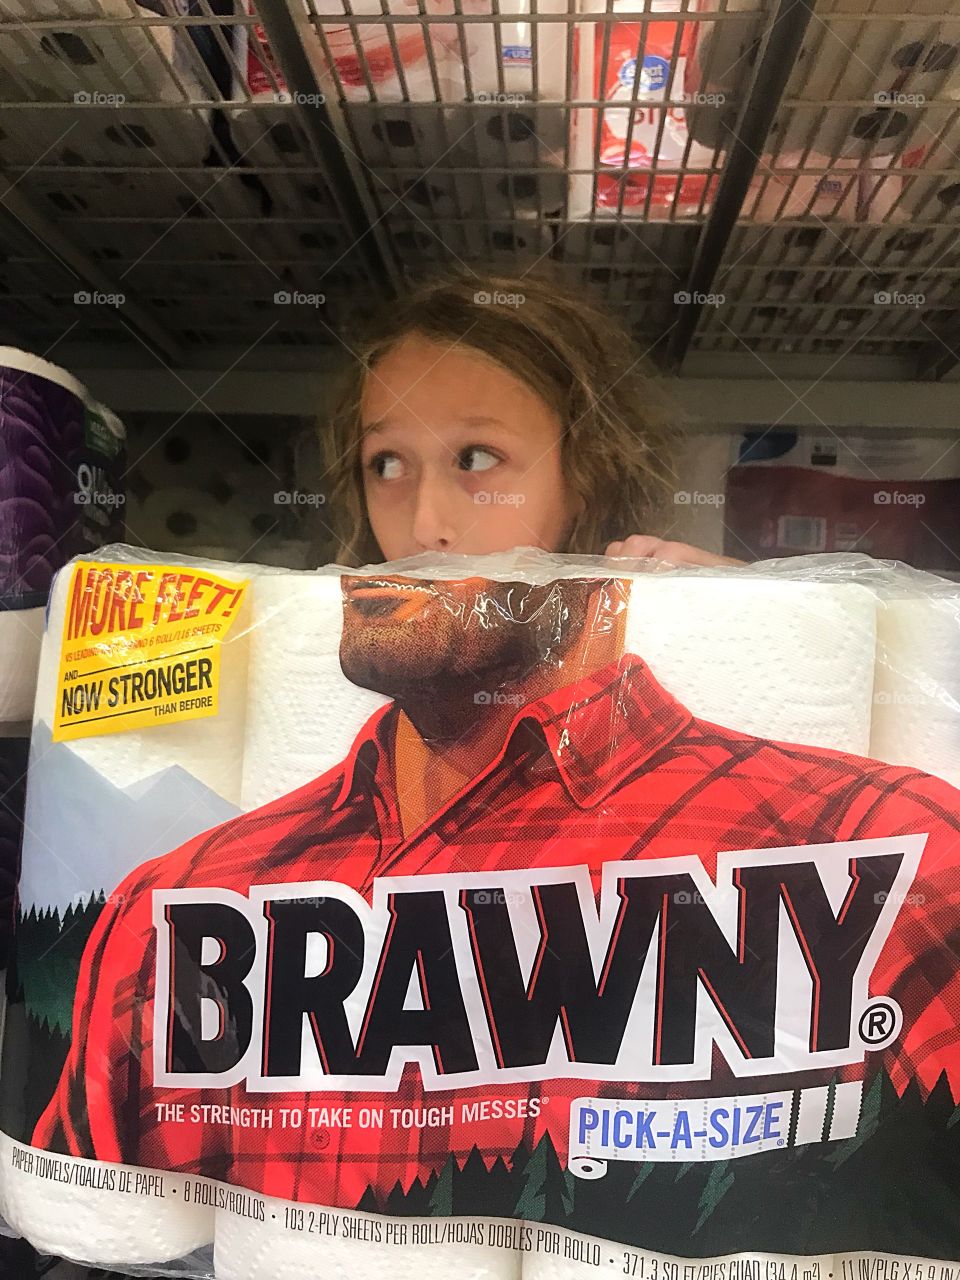 A funny little girl posing with the Brawny paper towels in the store. 